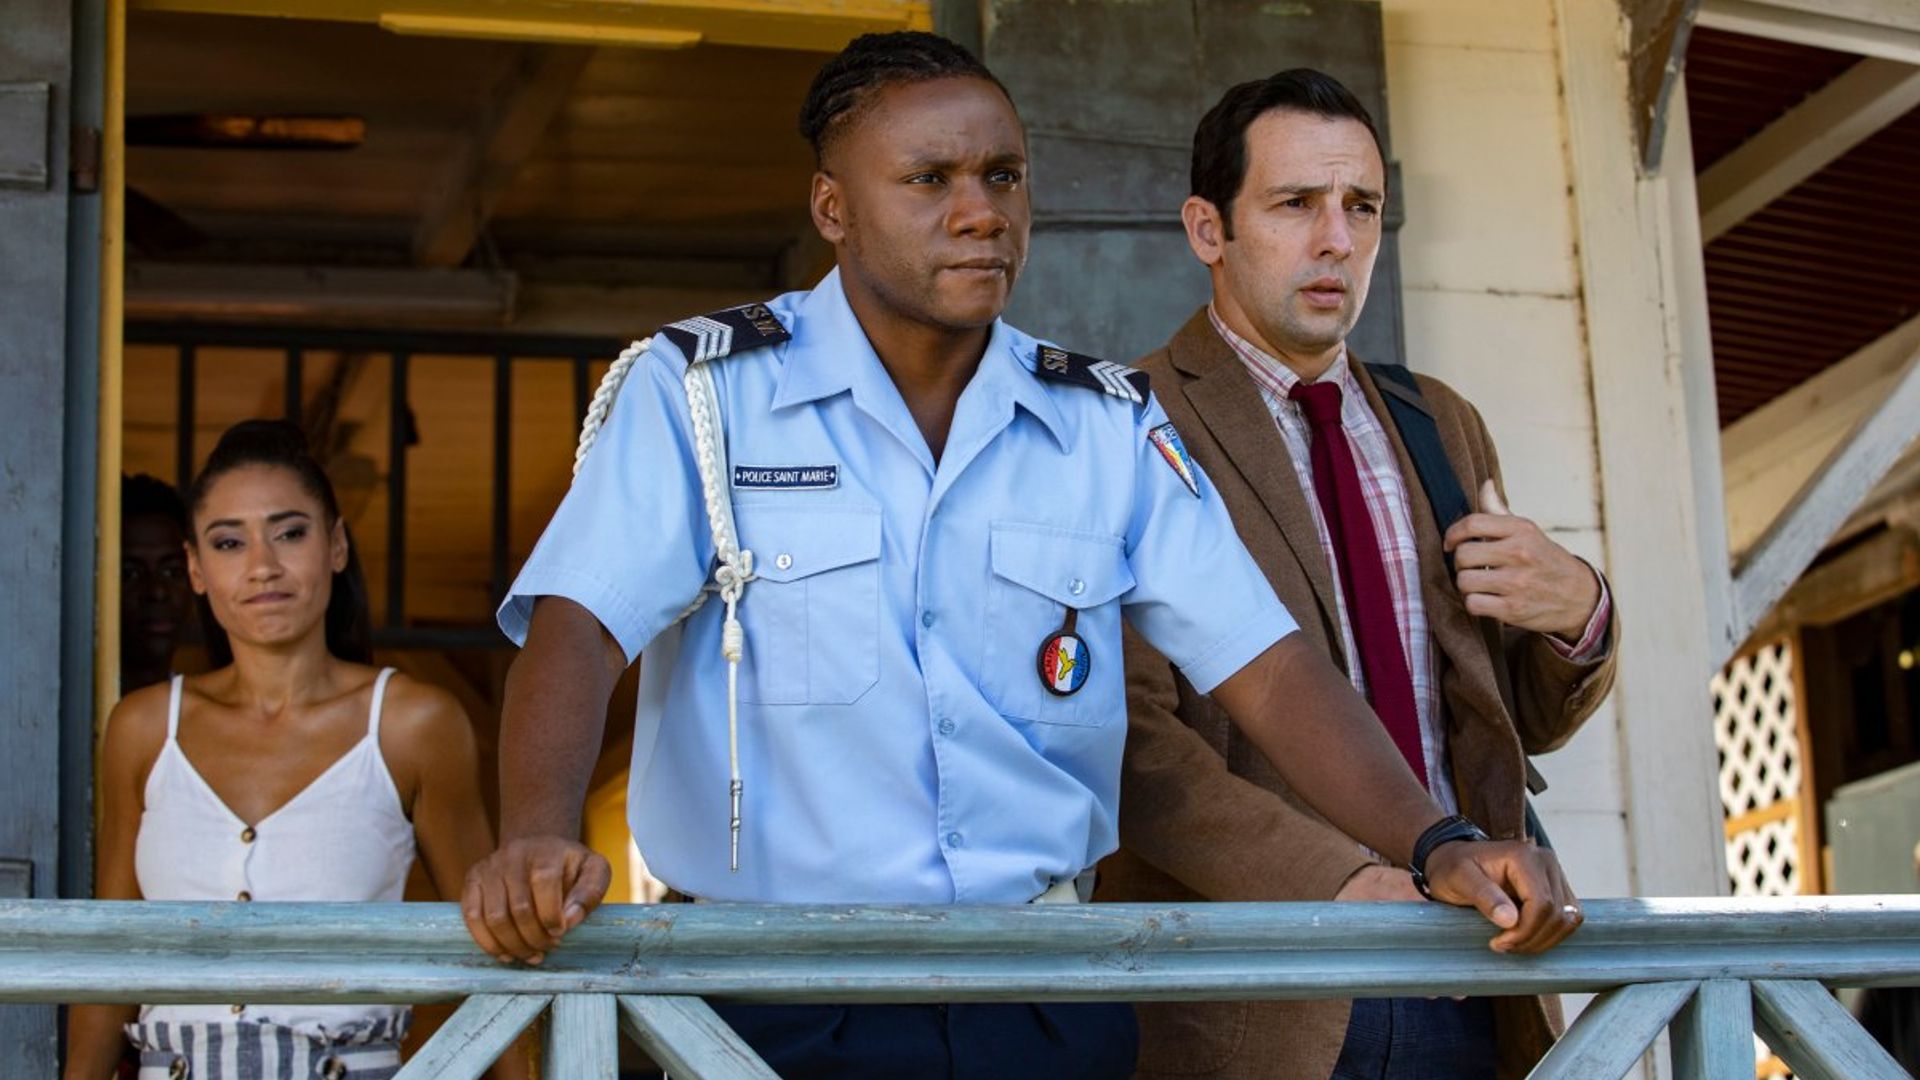 Death in Paradise stars talk about filming season 11 without Tobi Bakare